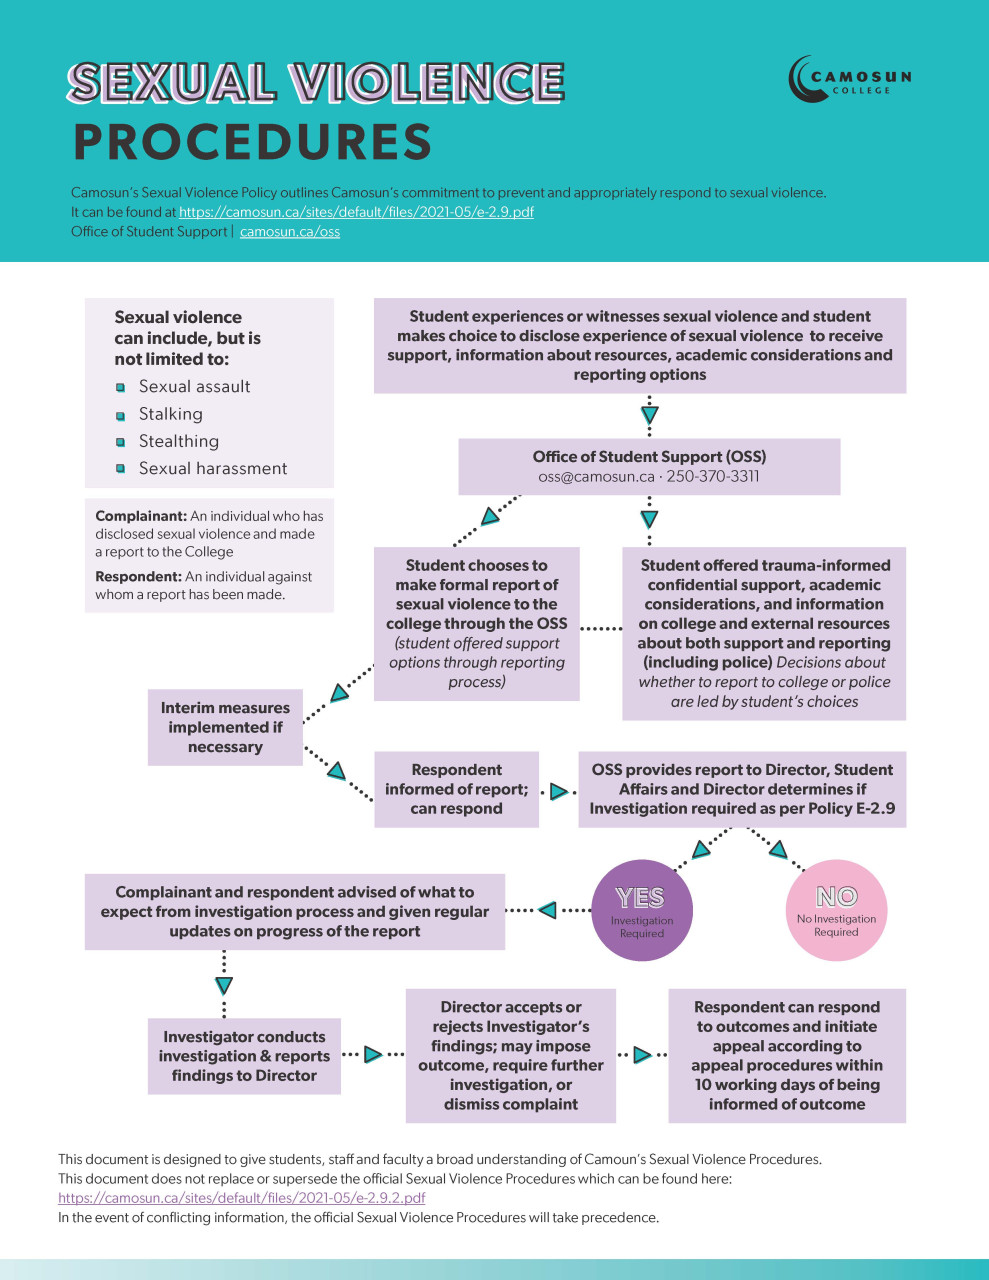 A flowchart outlining the process of disclosing an act of sexual violence